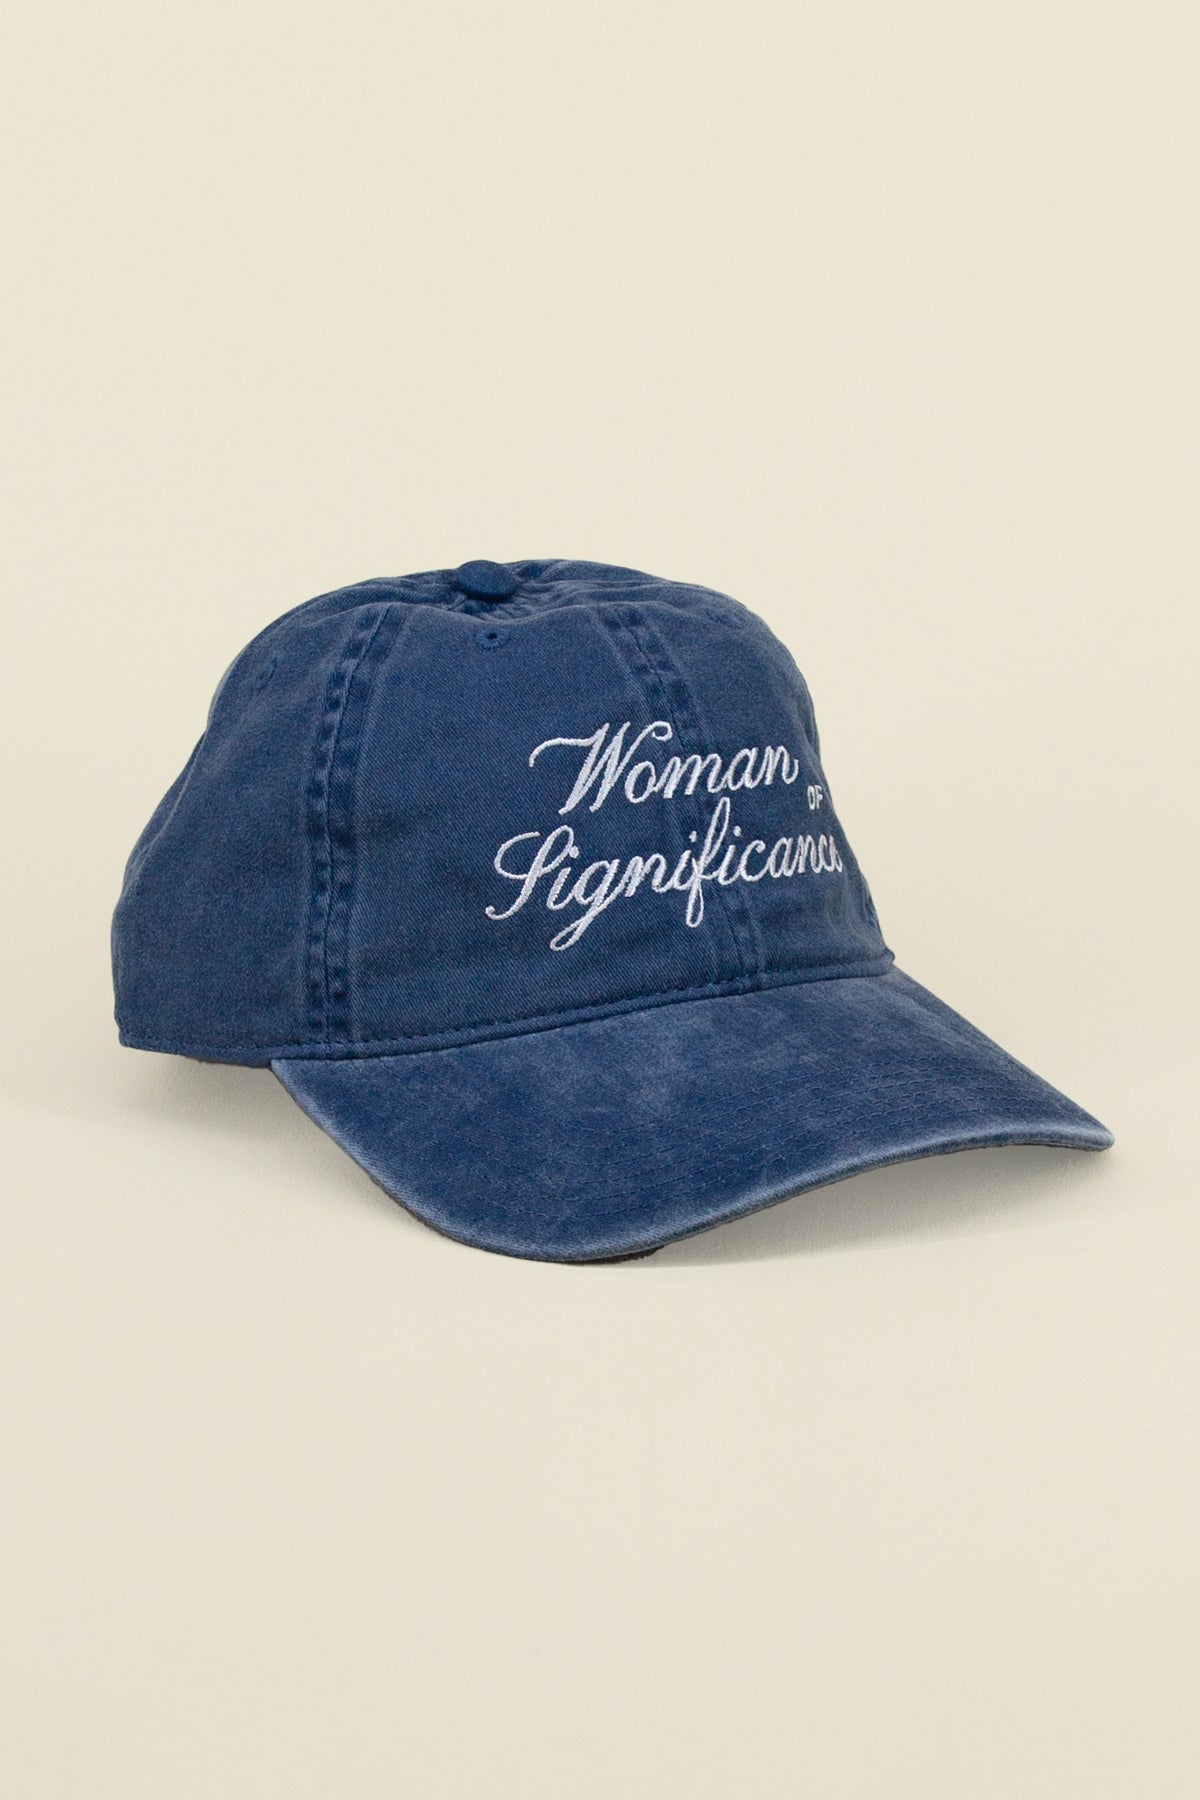 the deep dive: woman of significance hat